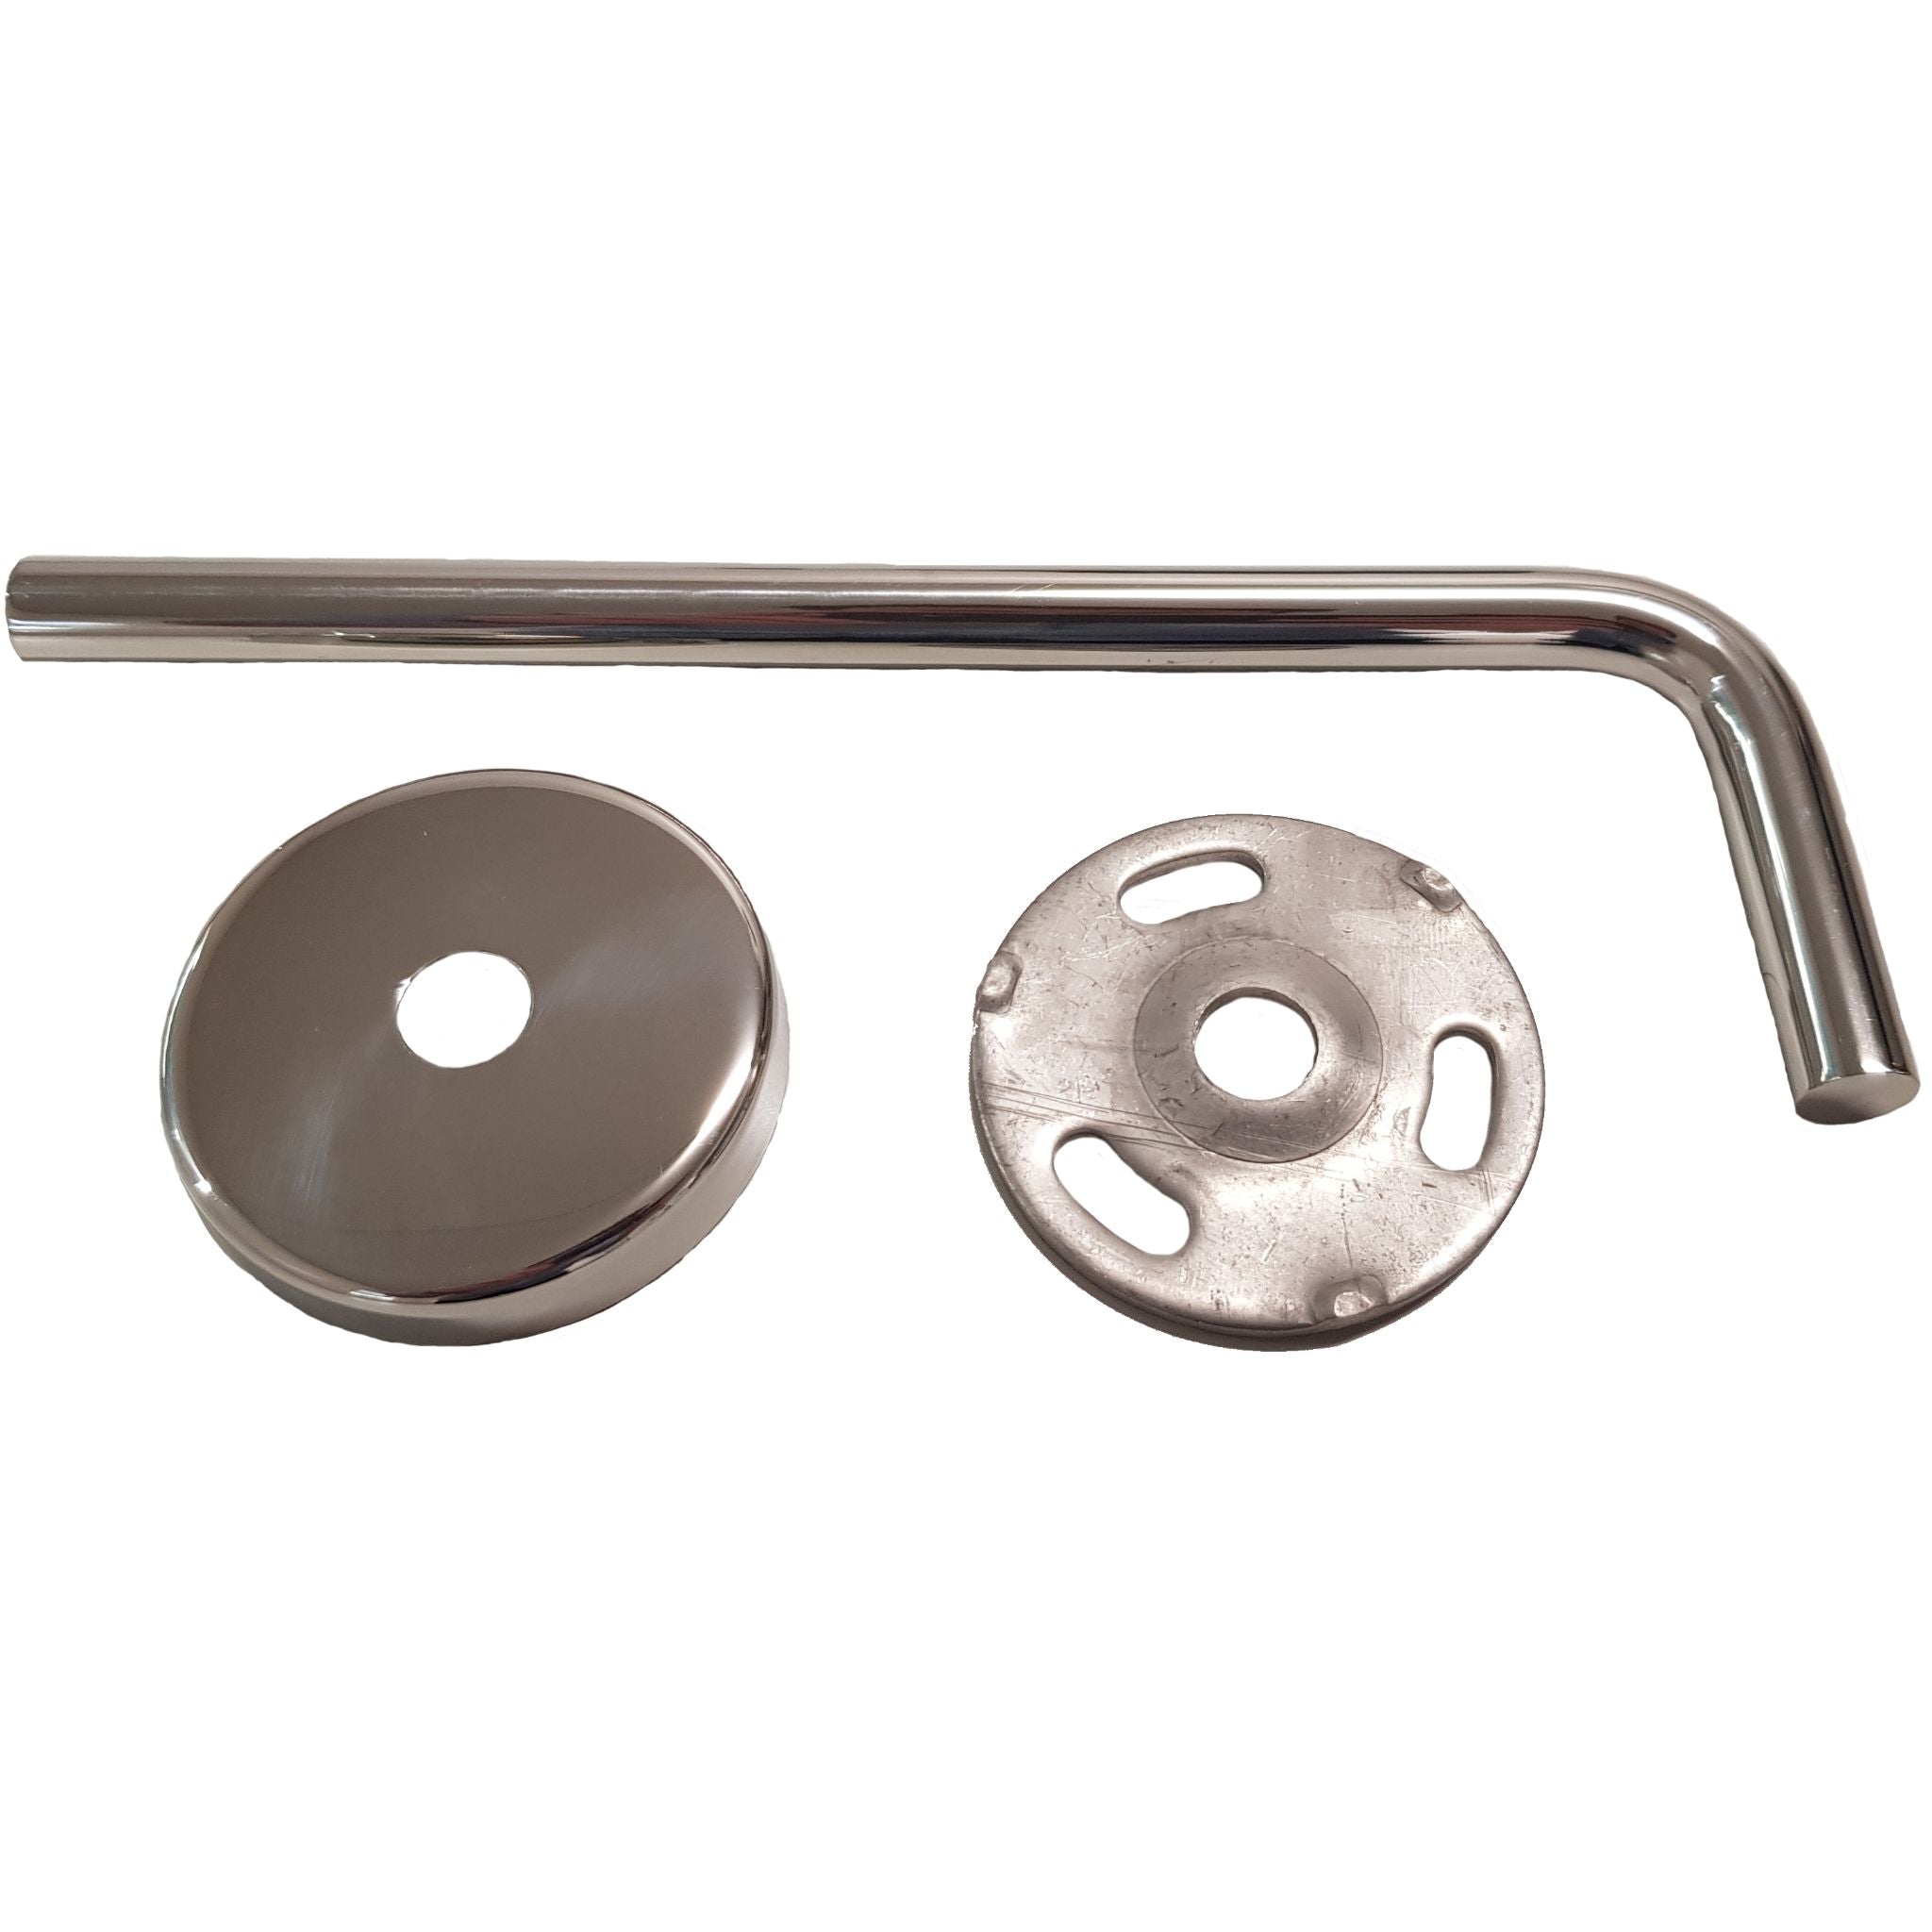 Handrail Bracket - Wall Mount - 250mm Long - Stainless Steel Products